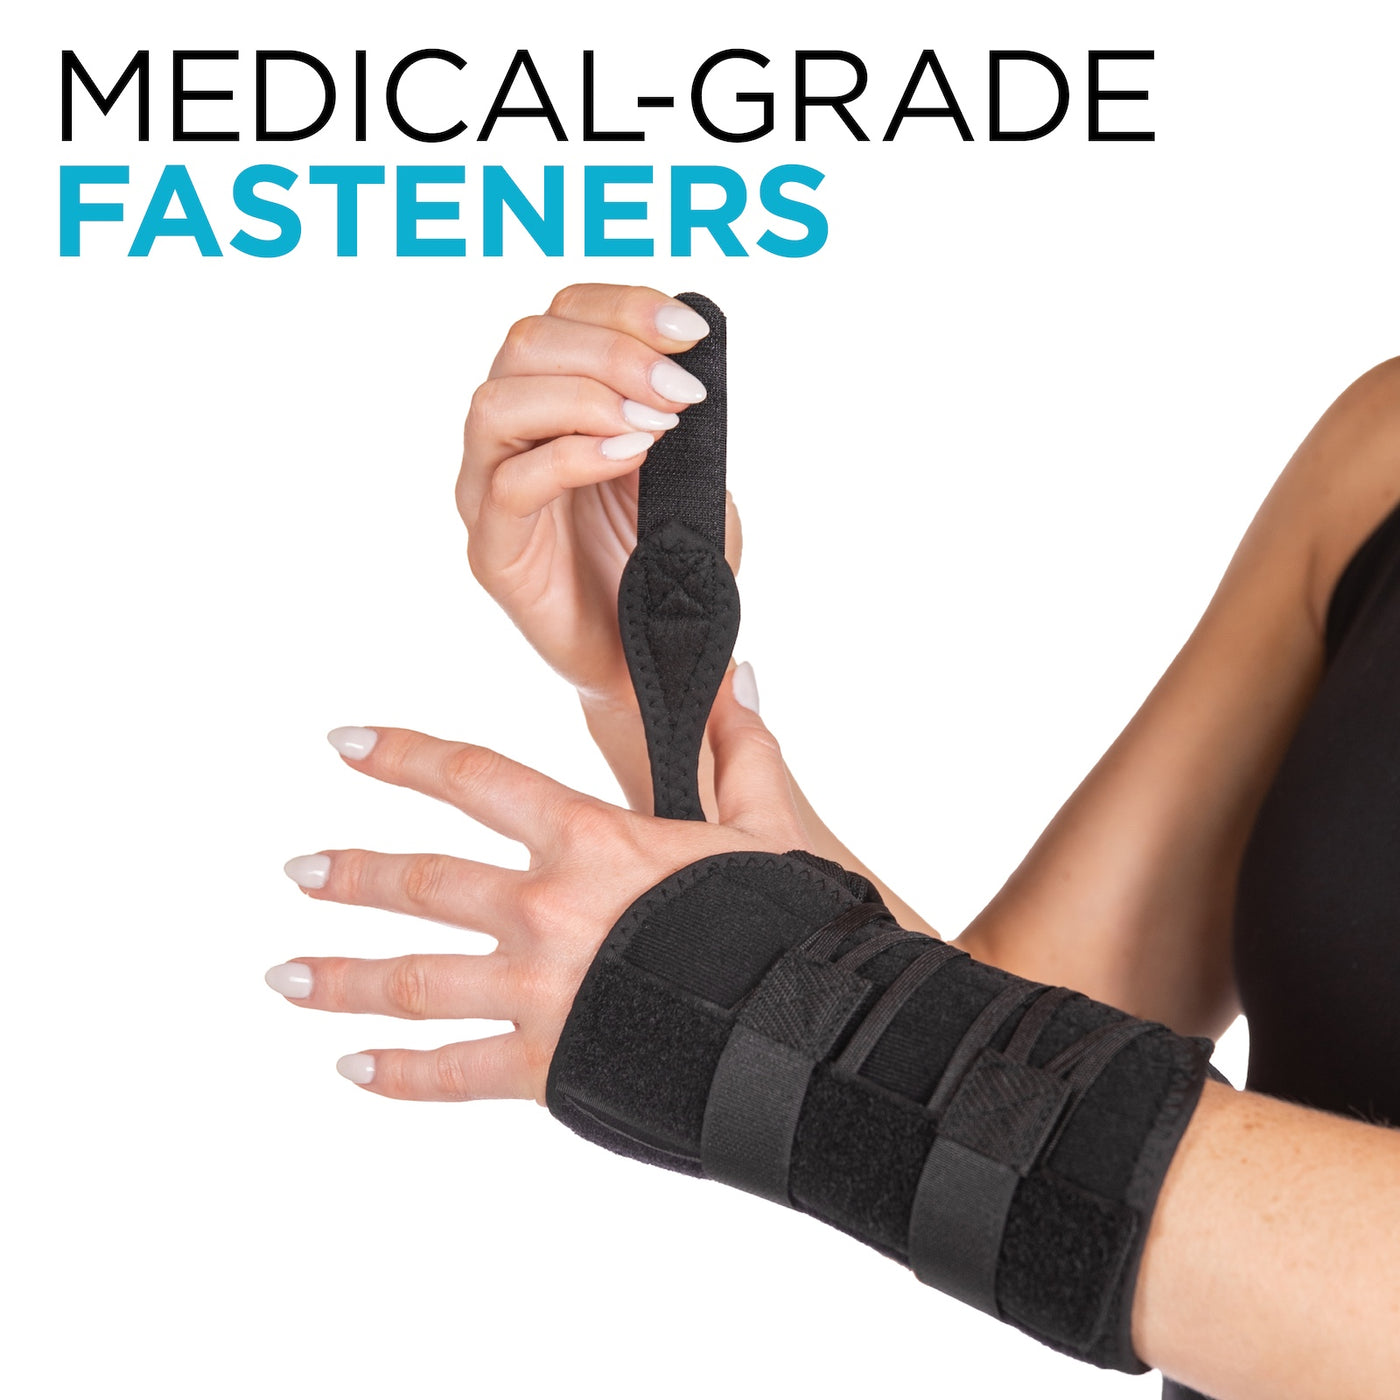 The ergonomic computer laptop gaming wrist brace has medical-grade fasteners keeping the brace in place all day